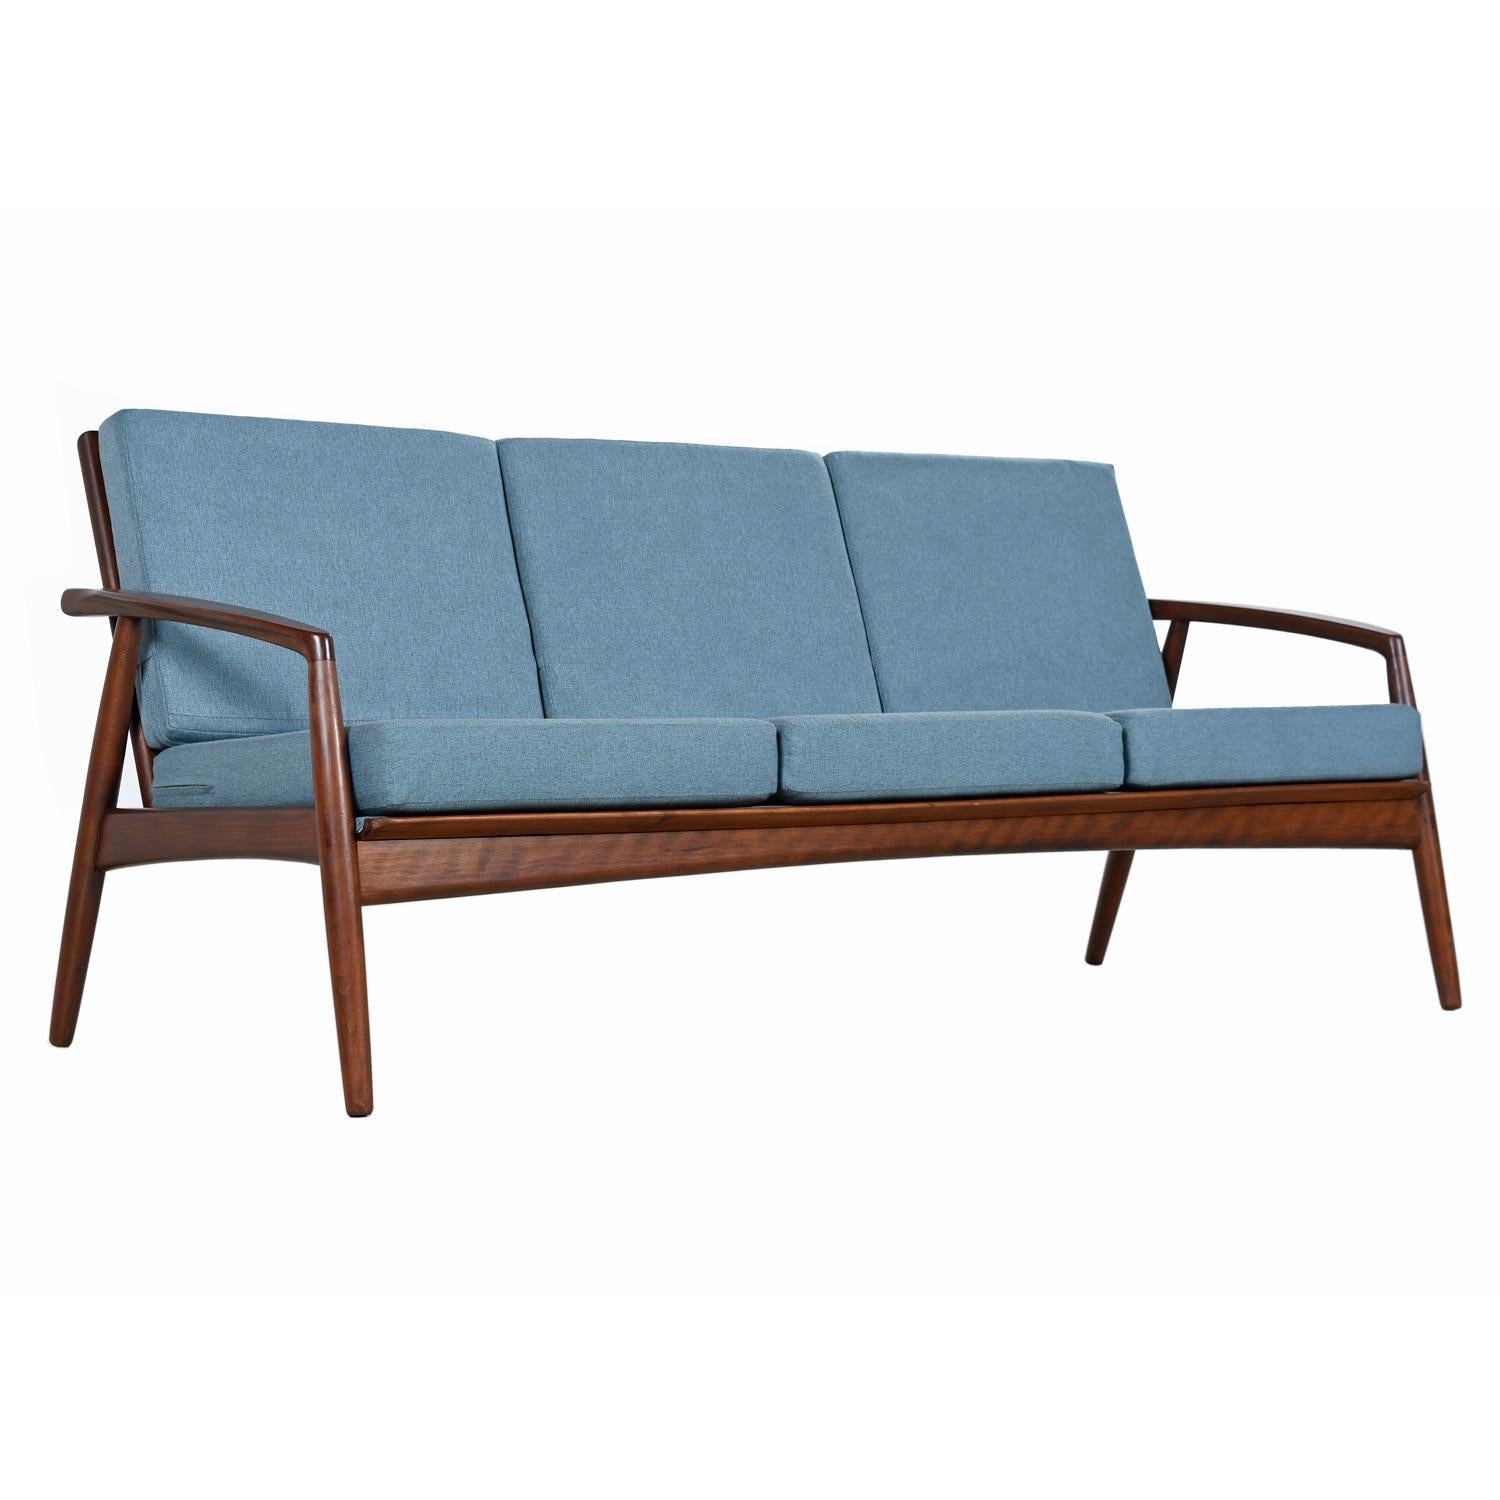 This stunning Danish made sofa by BOWA is one of the finest wood frame sofa’s we have seen from the period. Vintage early 1960s, SV.A. Madsen expands on the quintessential wood frame sofa to create something truly special. The arched arms are a